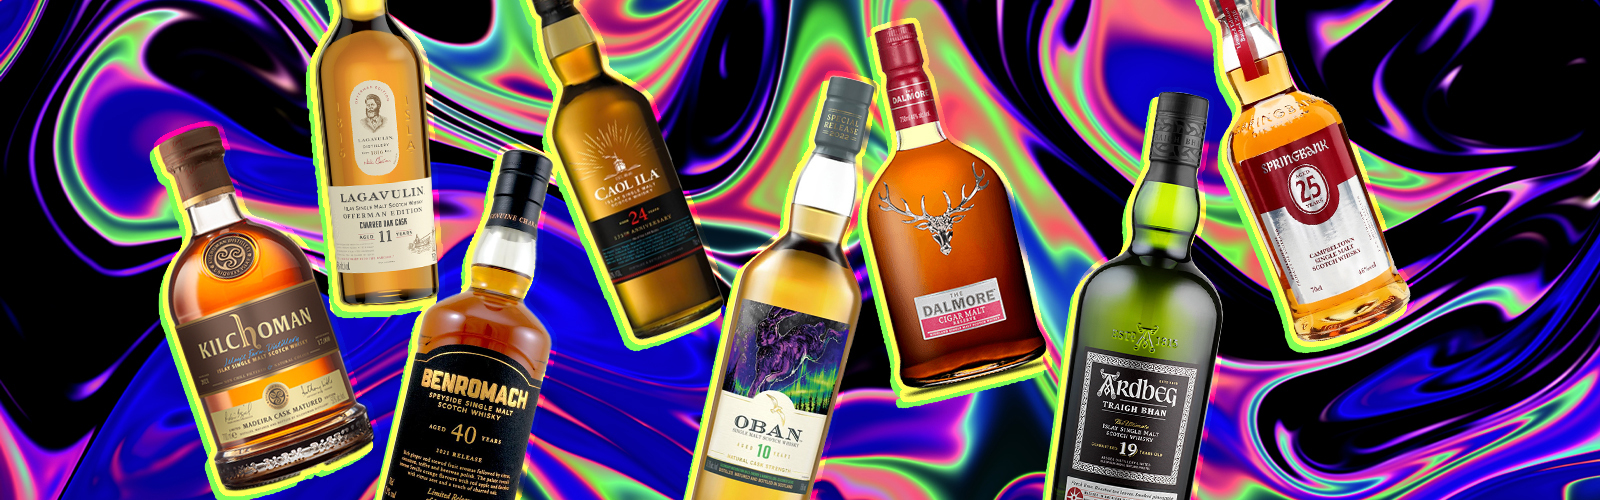 Best Scotch Whisky in 2023, According ASCOT Awards 